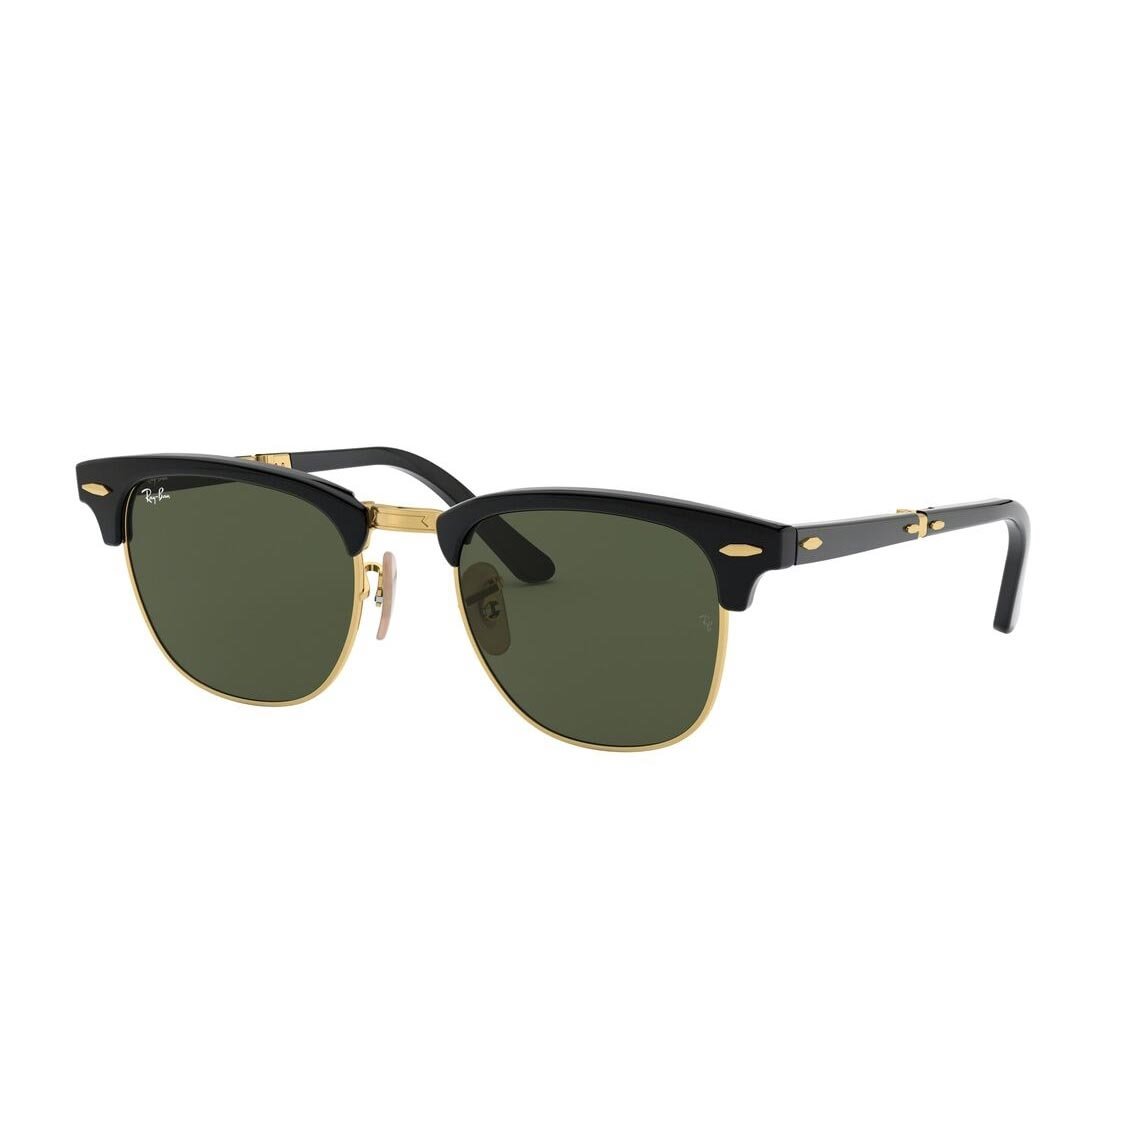 Ray-Ban Clubmaster folding RB2176 901 51